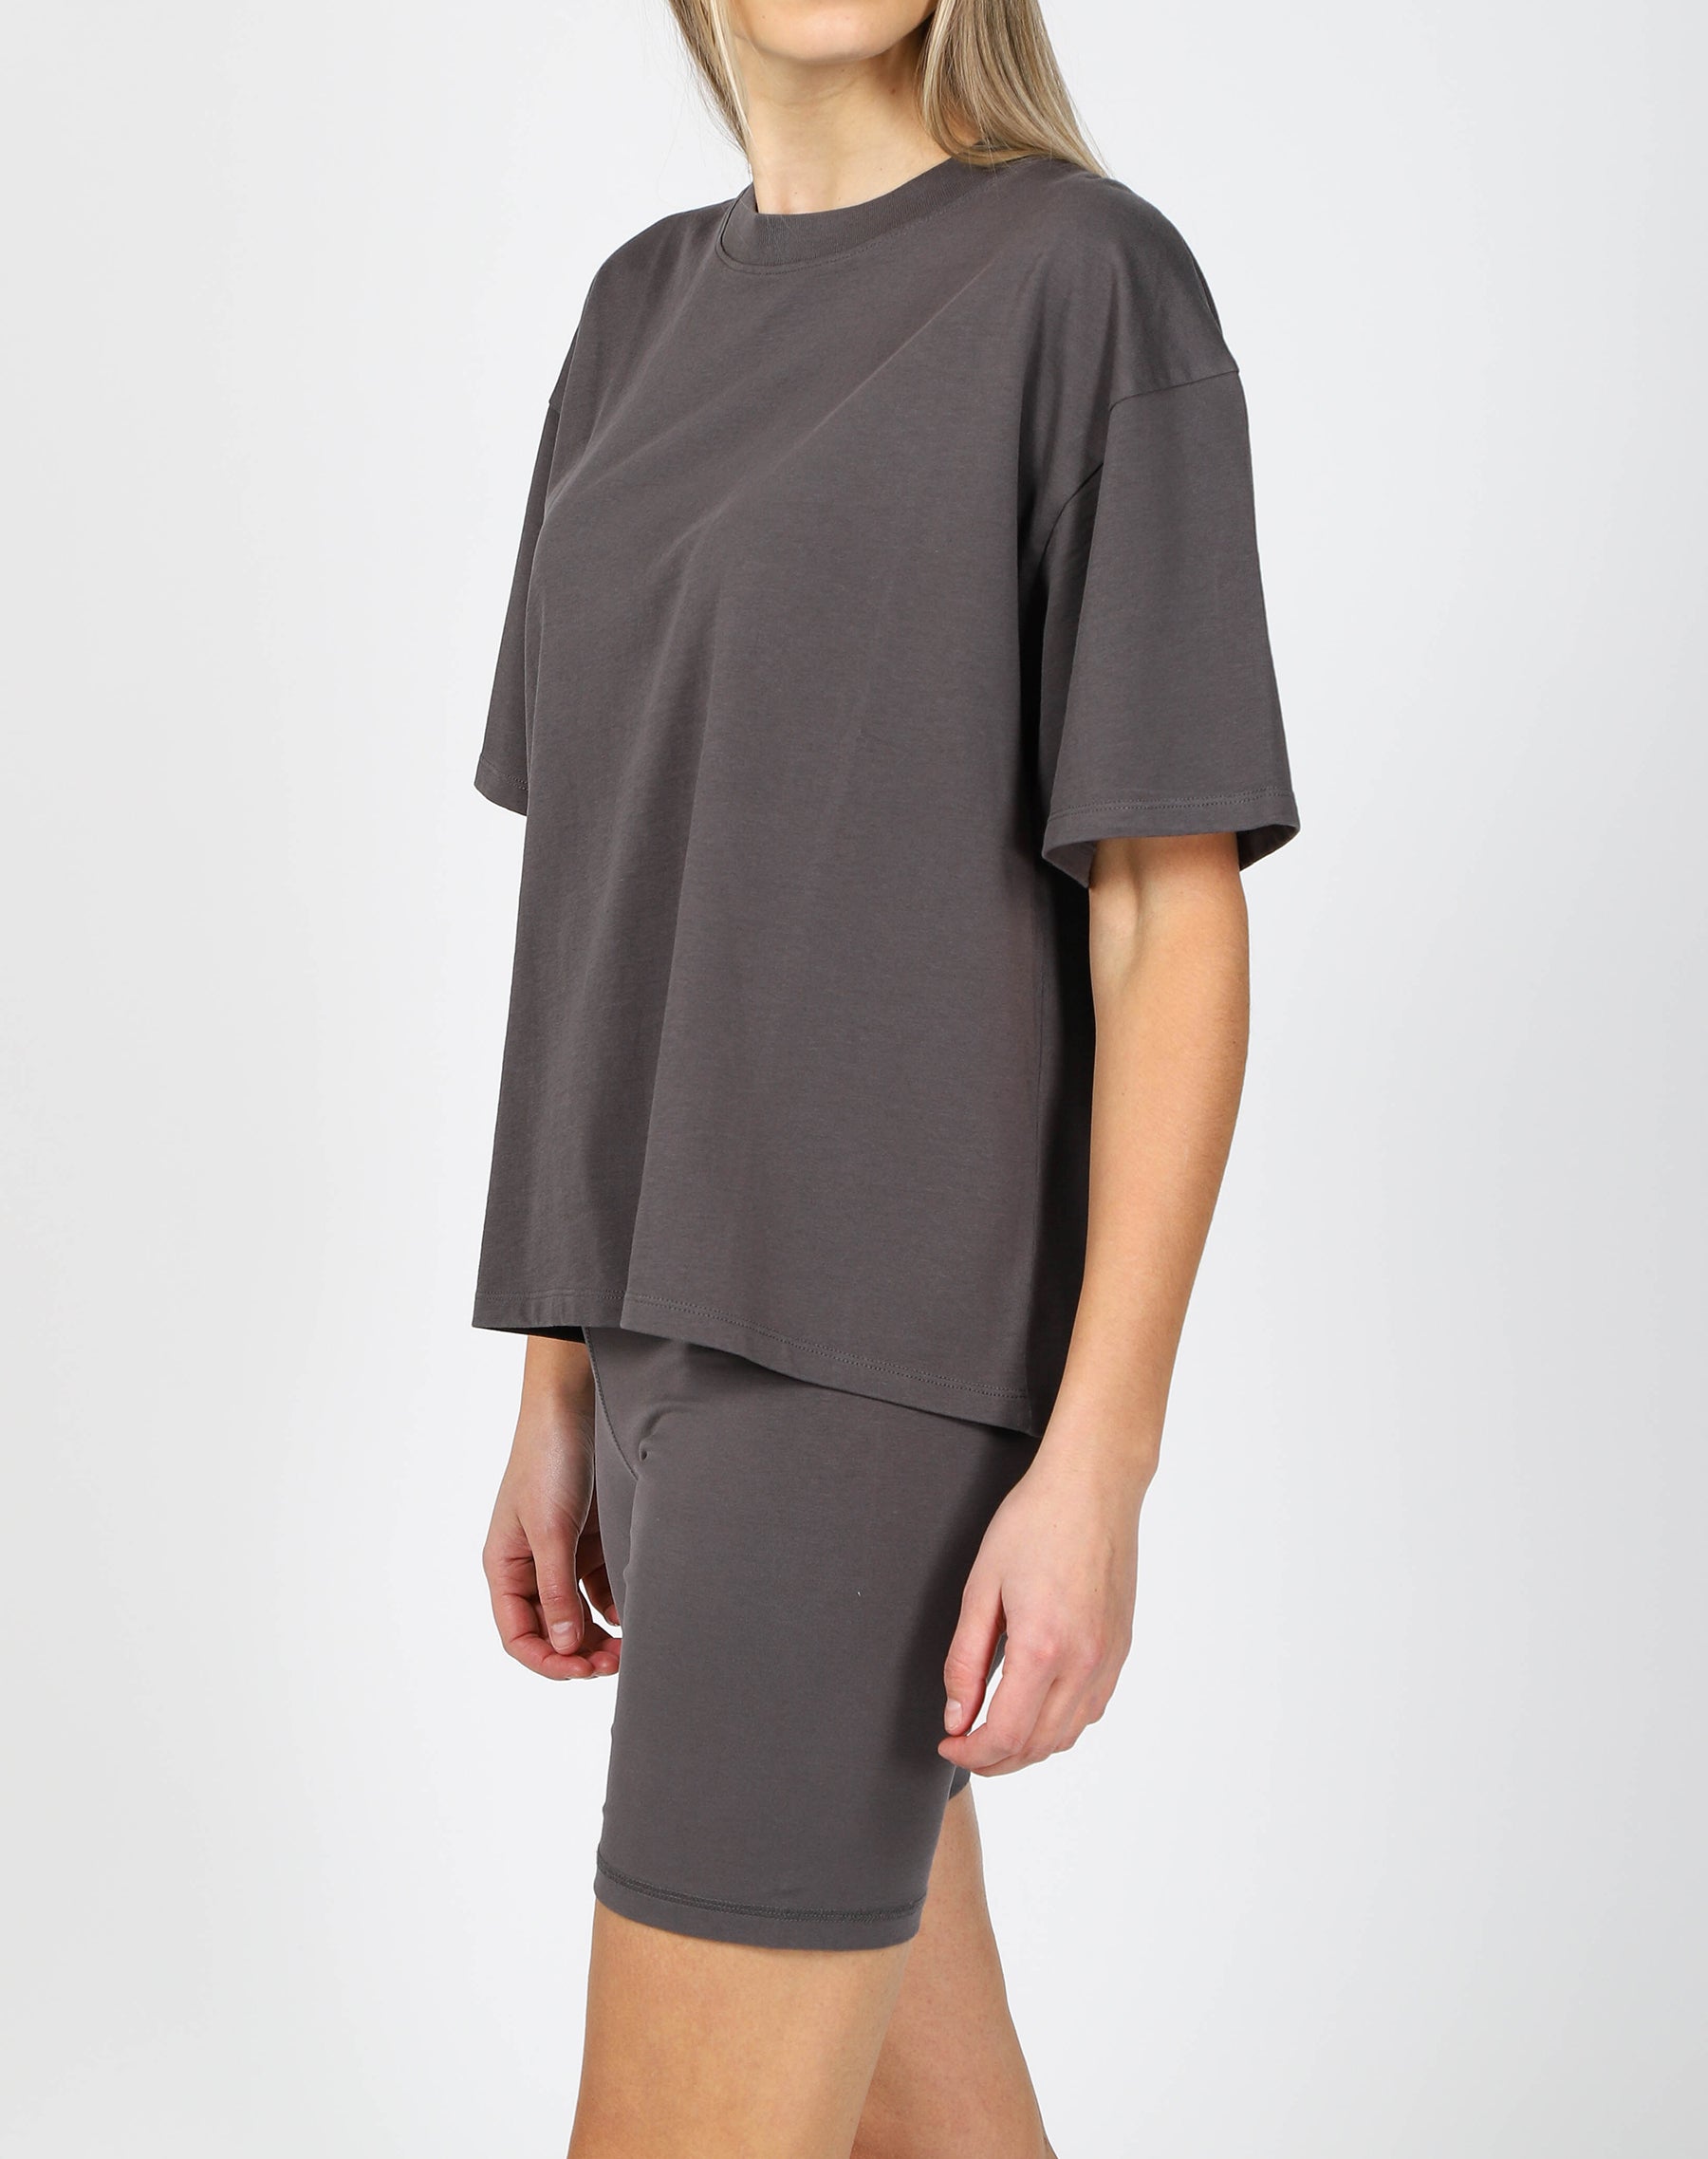 The Boxy Crew Neck Tee | Washed Grey